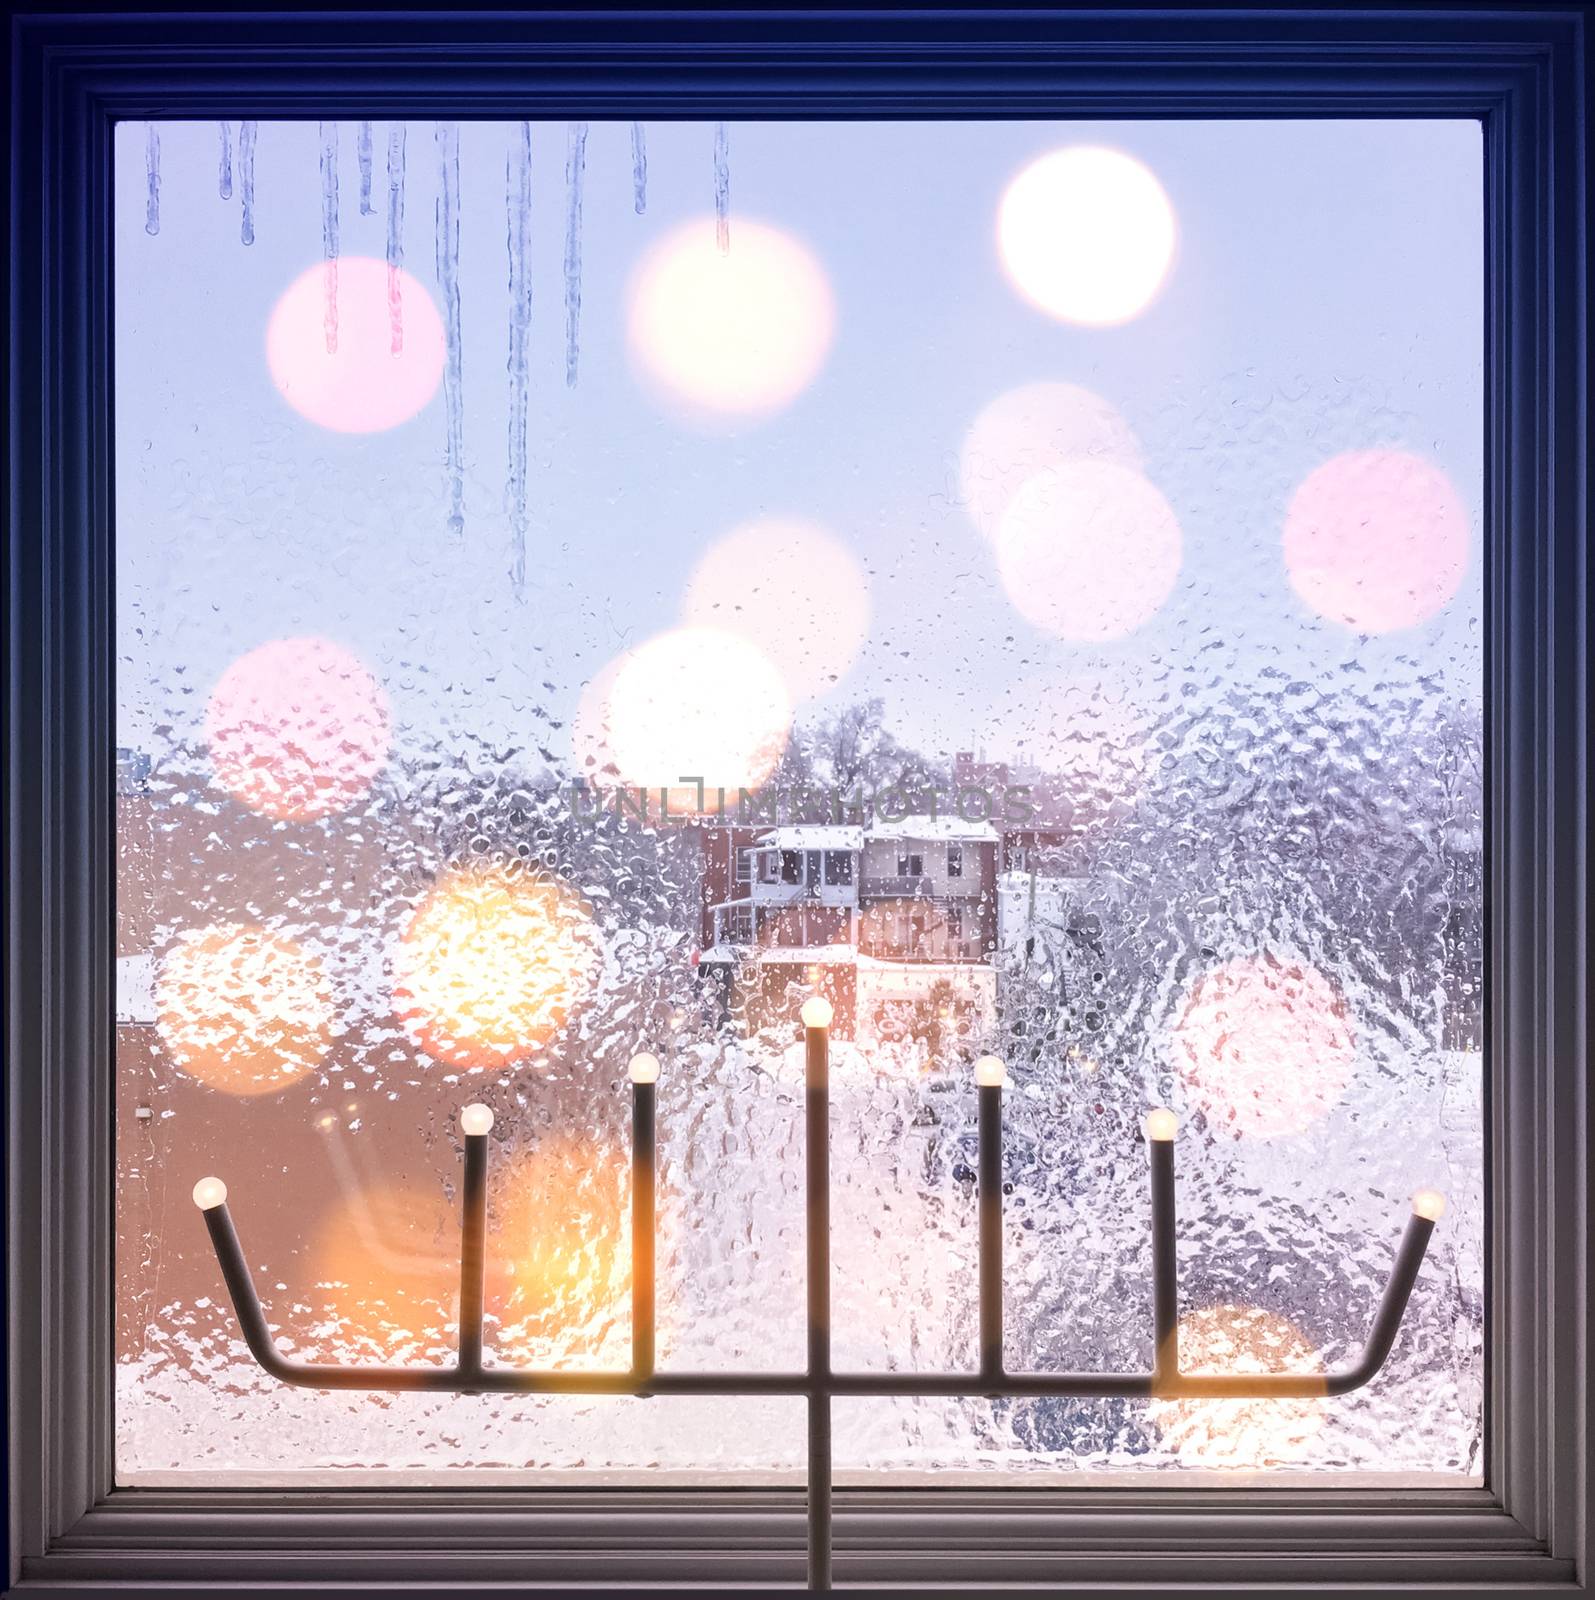 Lights on a frosted window by anikasalsera